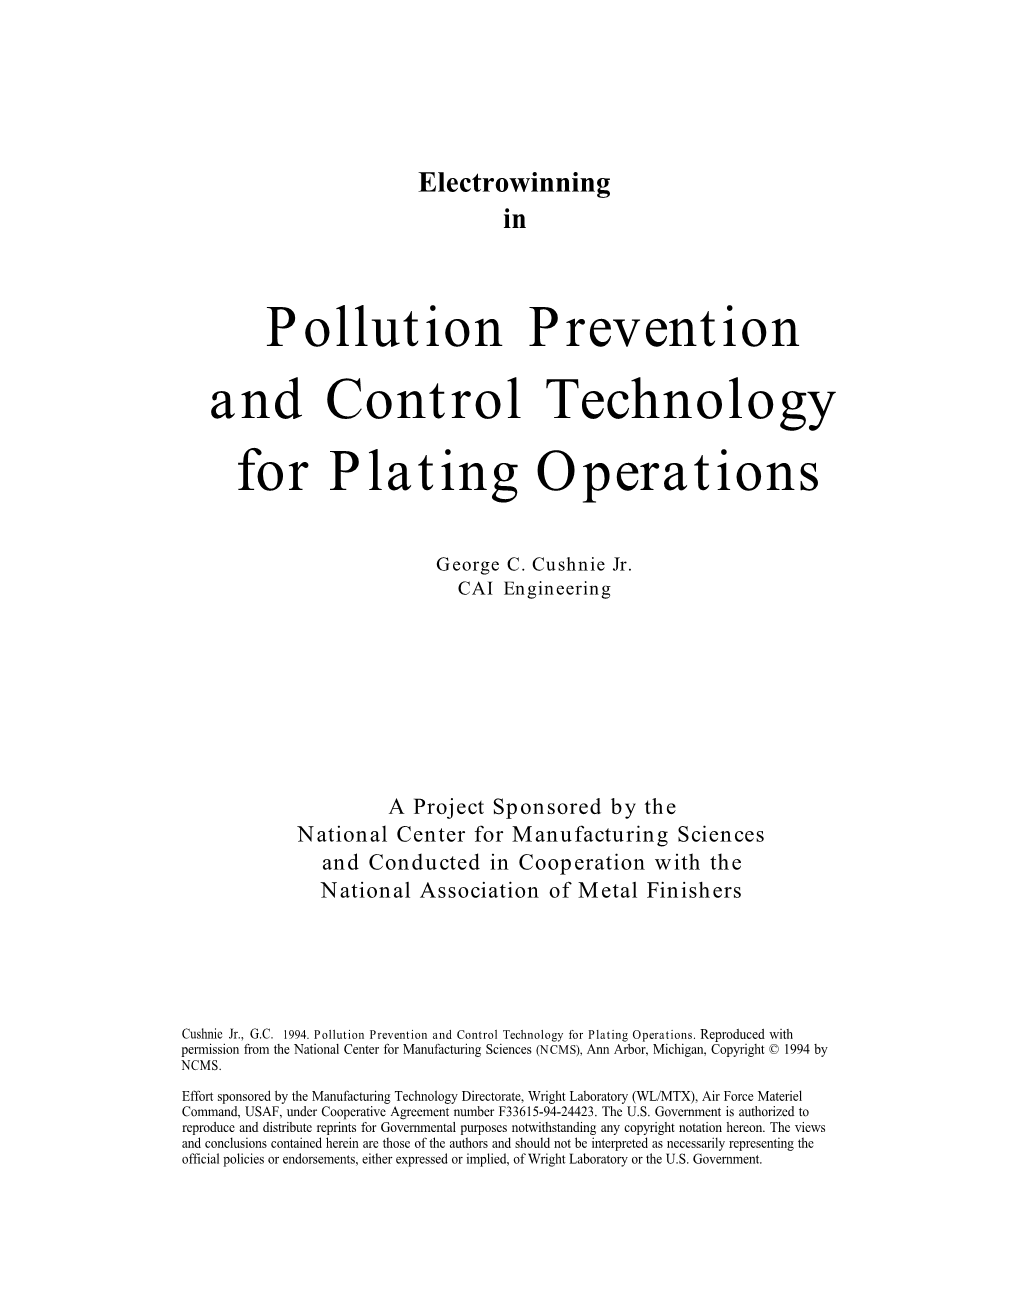 Electrowinning in Pollution Prevention and Control Technology for Plating Operations